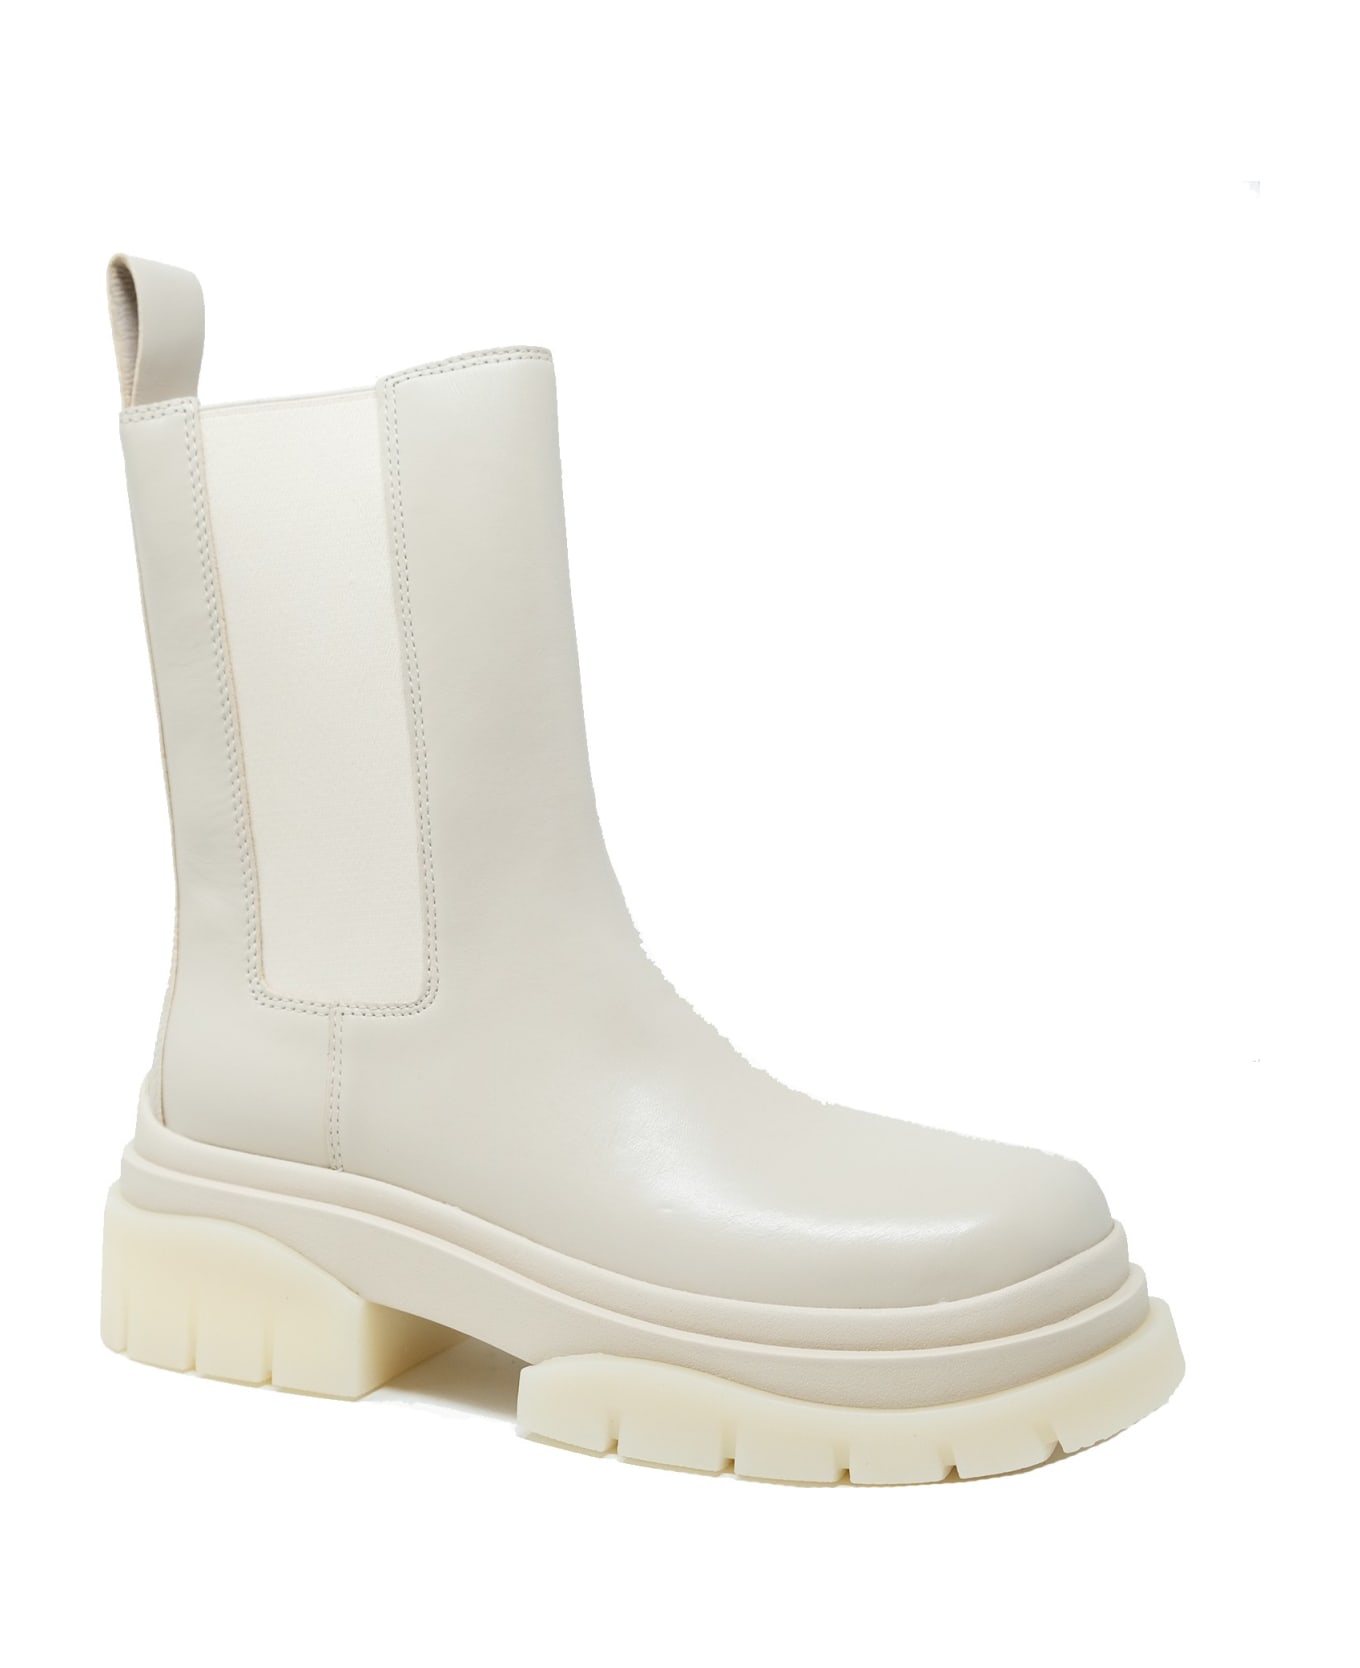 Ash Mustang Cream Ankle Boots - CREAM